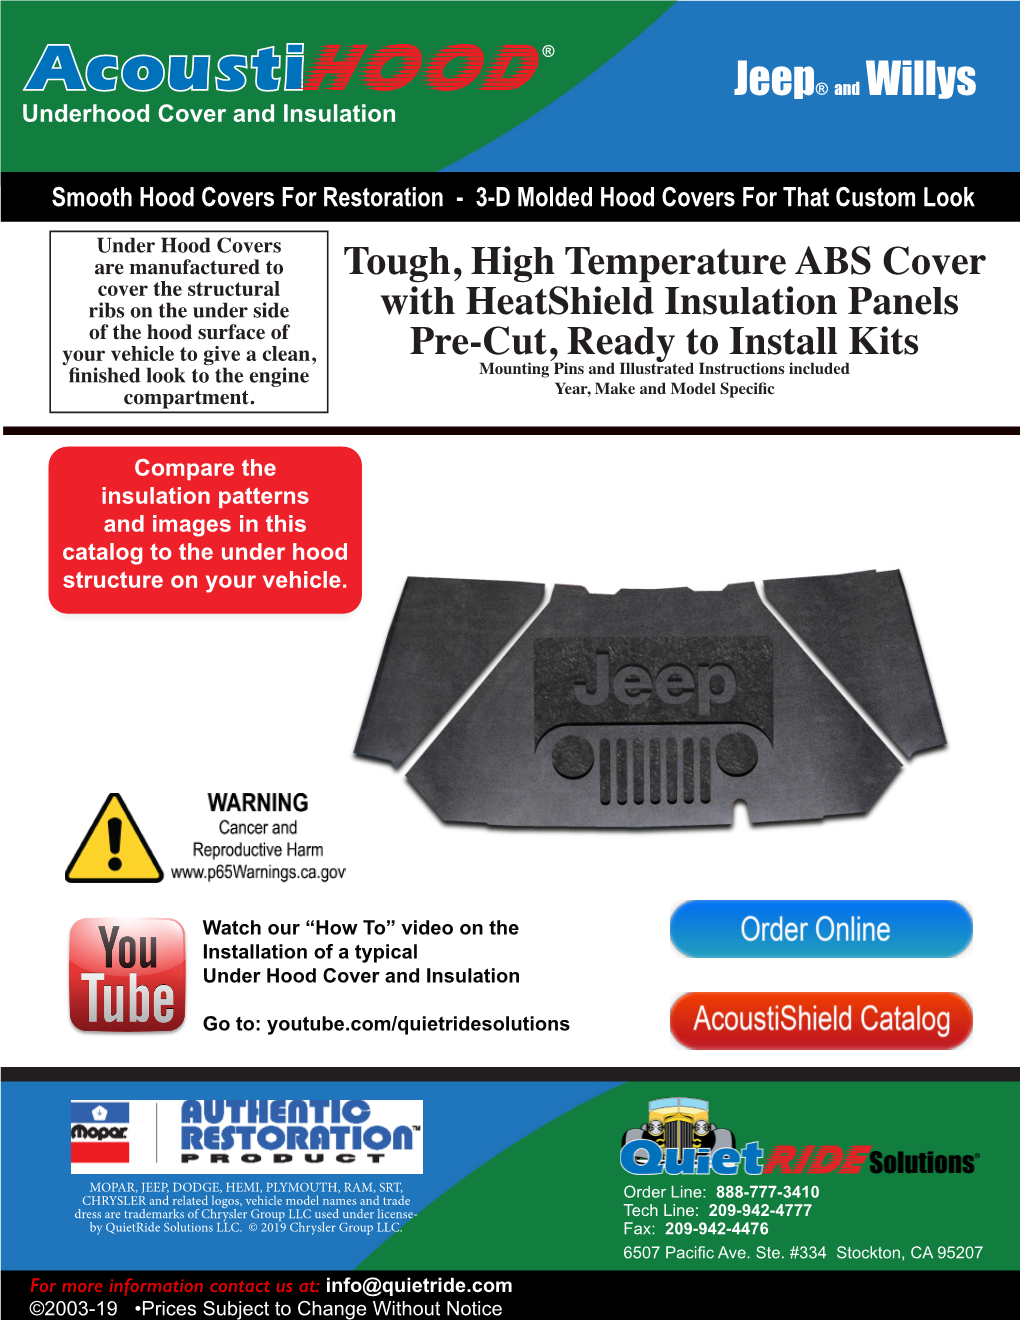 Smooth Hood Covers for Restoration - 3-D Molded Hood Covers for That Custom Look